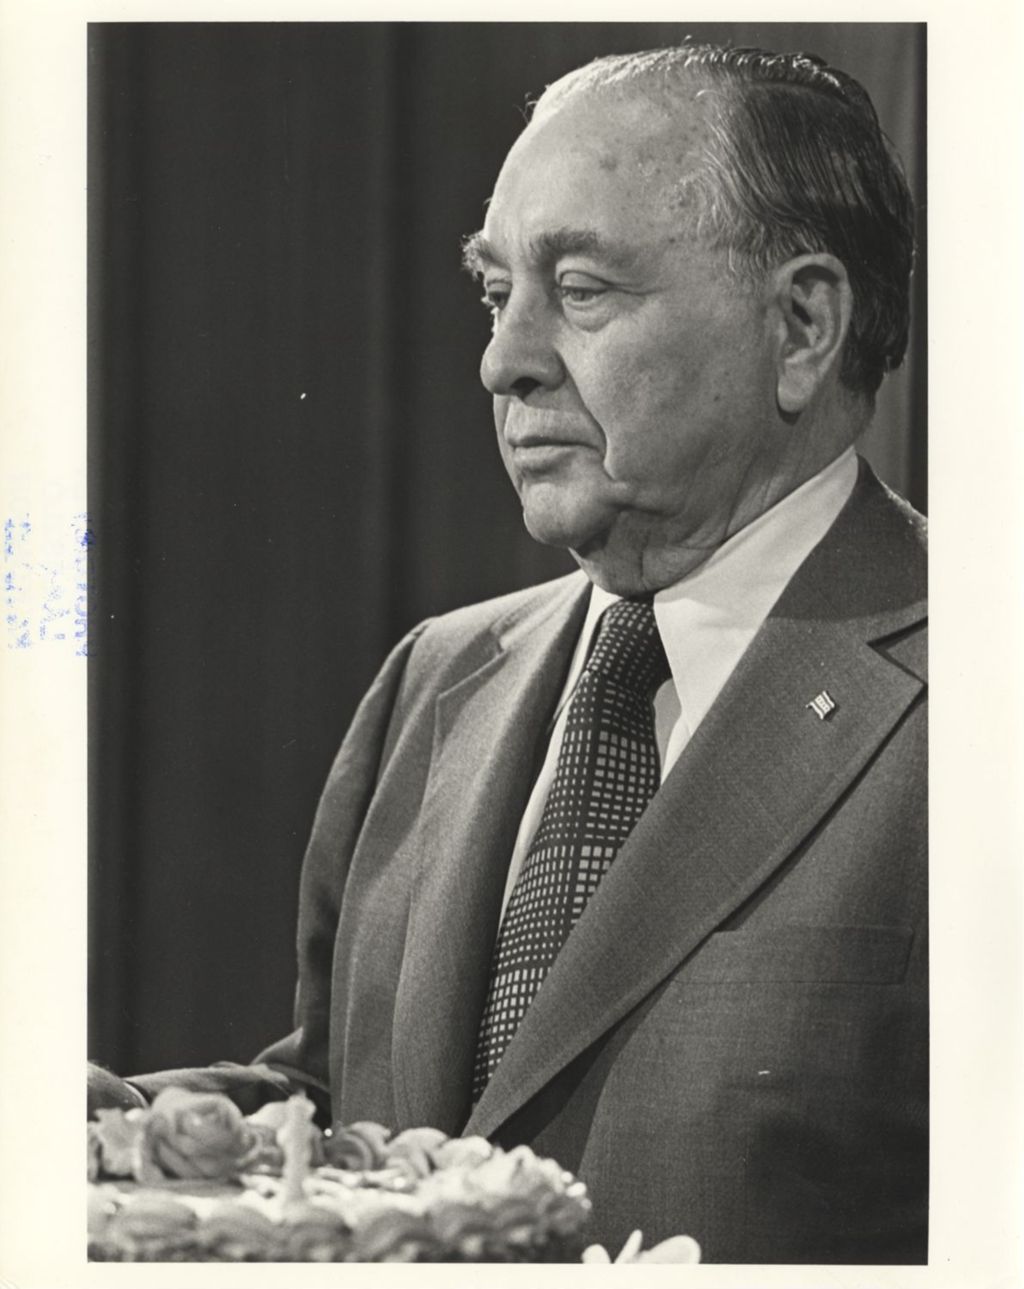 Miniature of Richard J. Daley with a cake